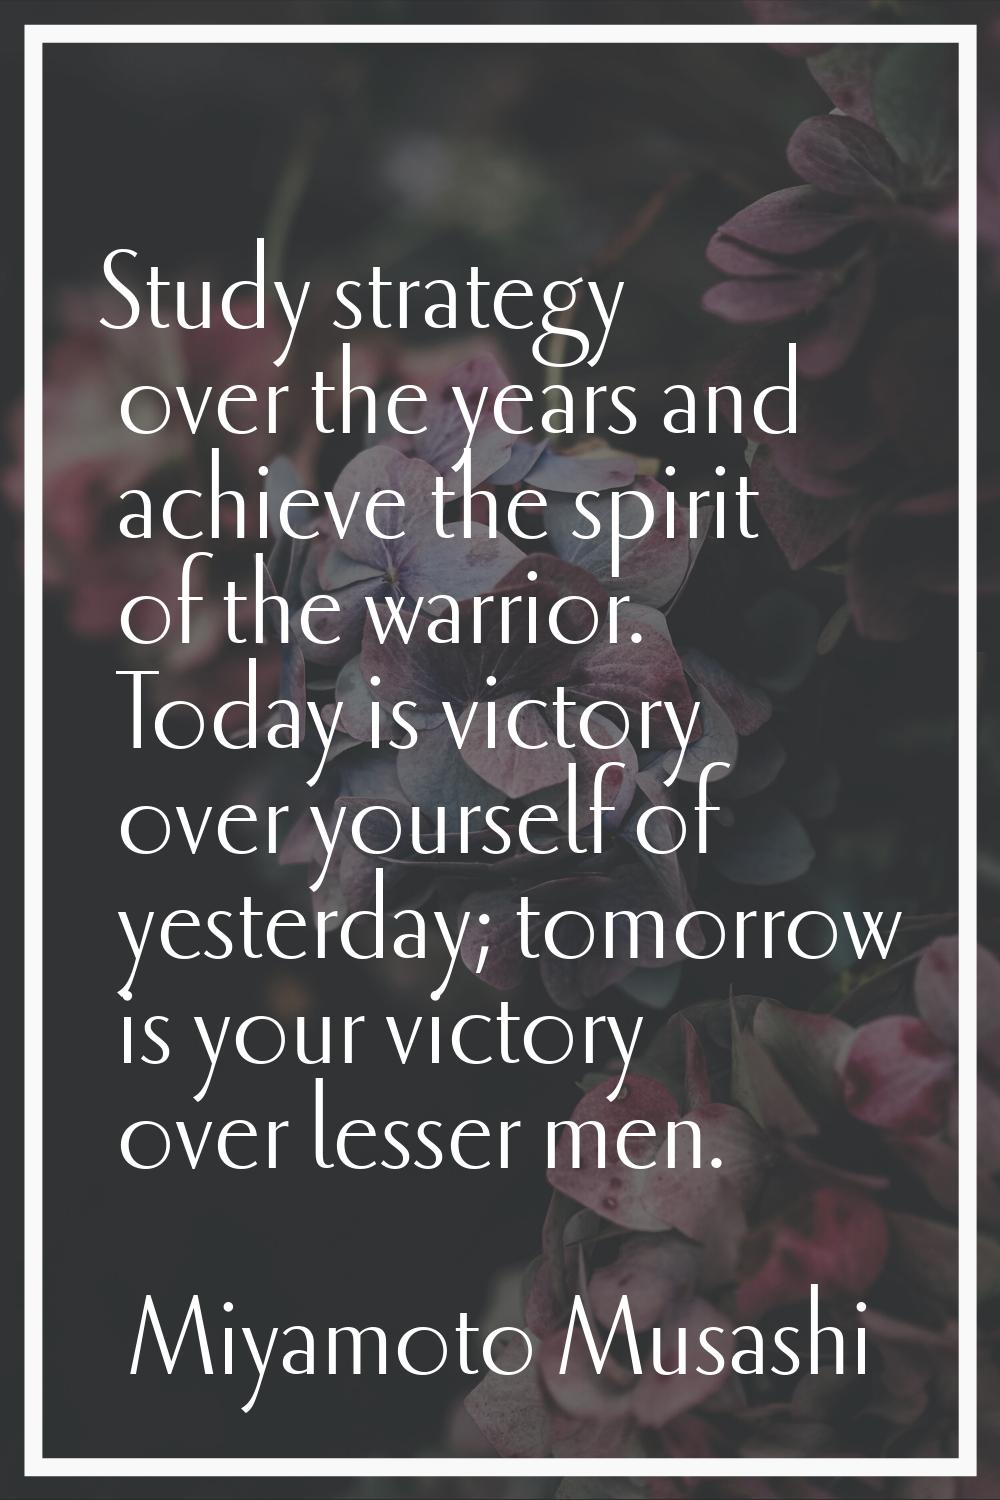 Study strategy over the years and achieve the spirit of the warrior. Today is victory over yourself